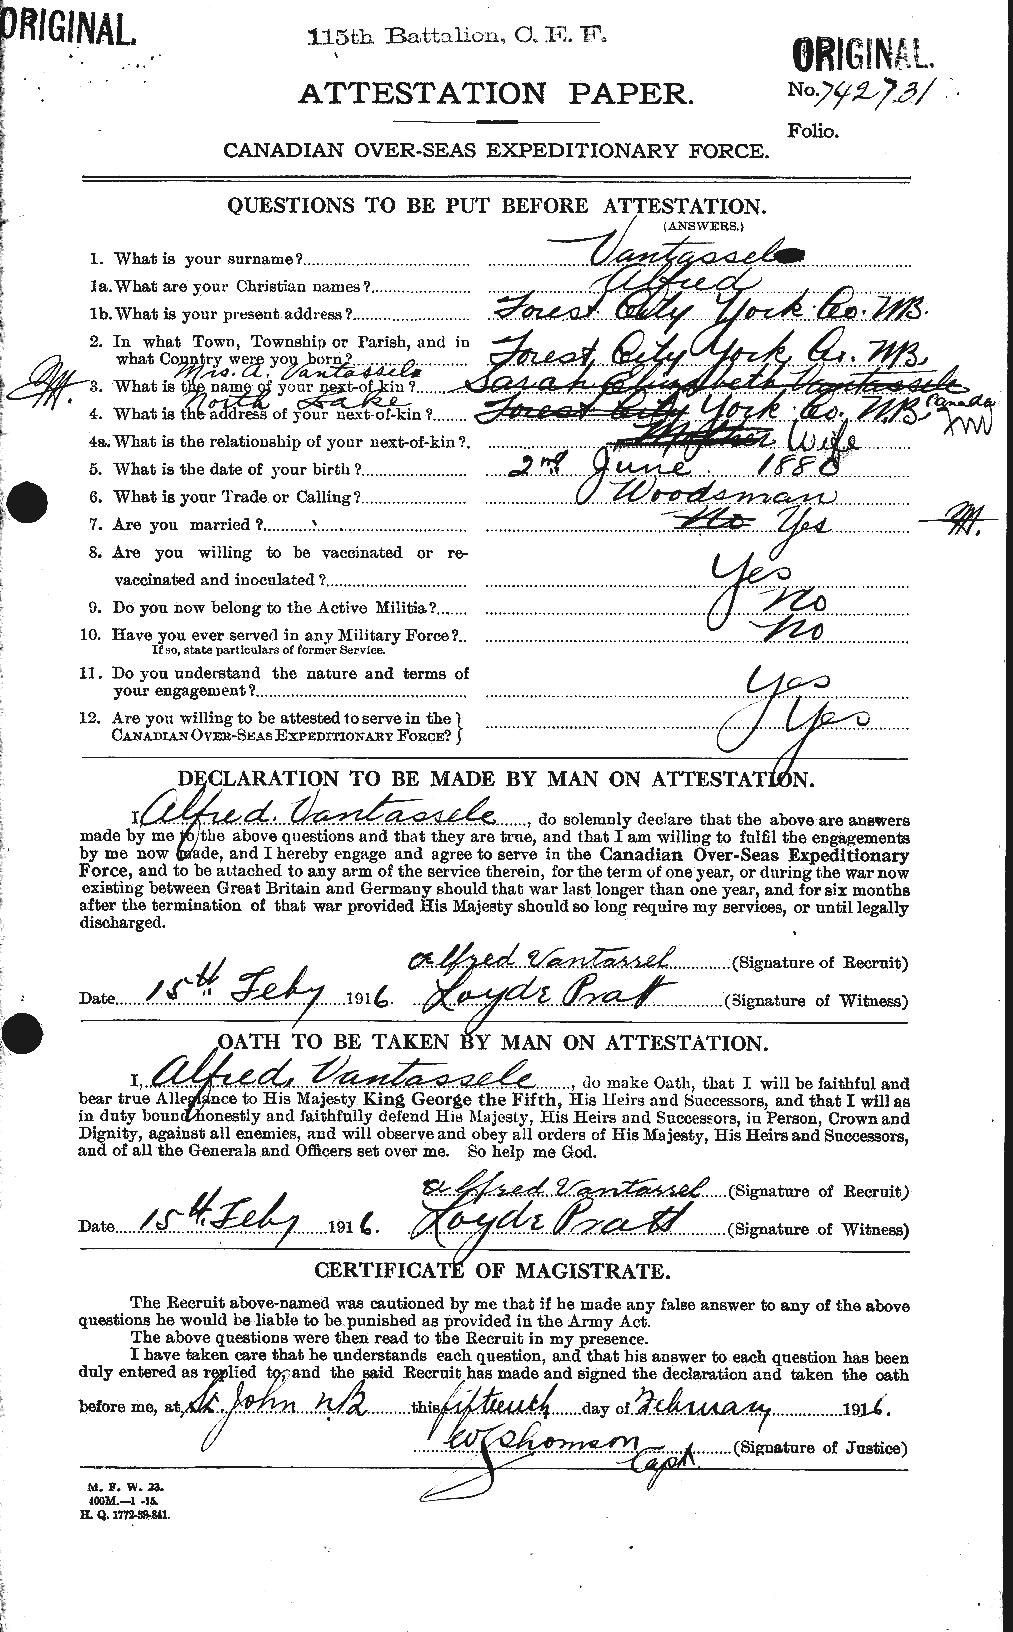 Personnel Records of the First World War - CEF 648952a